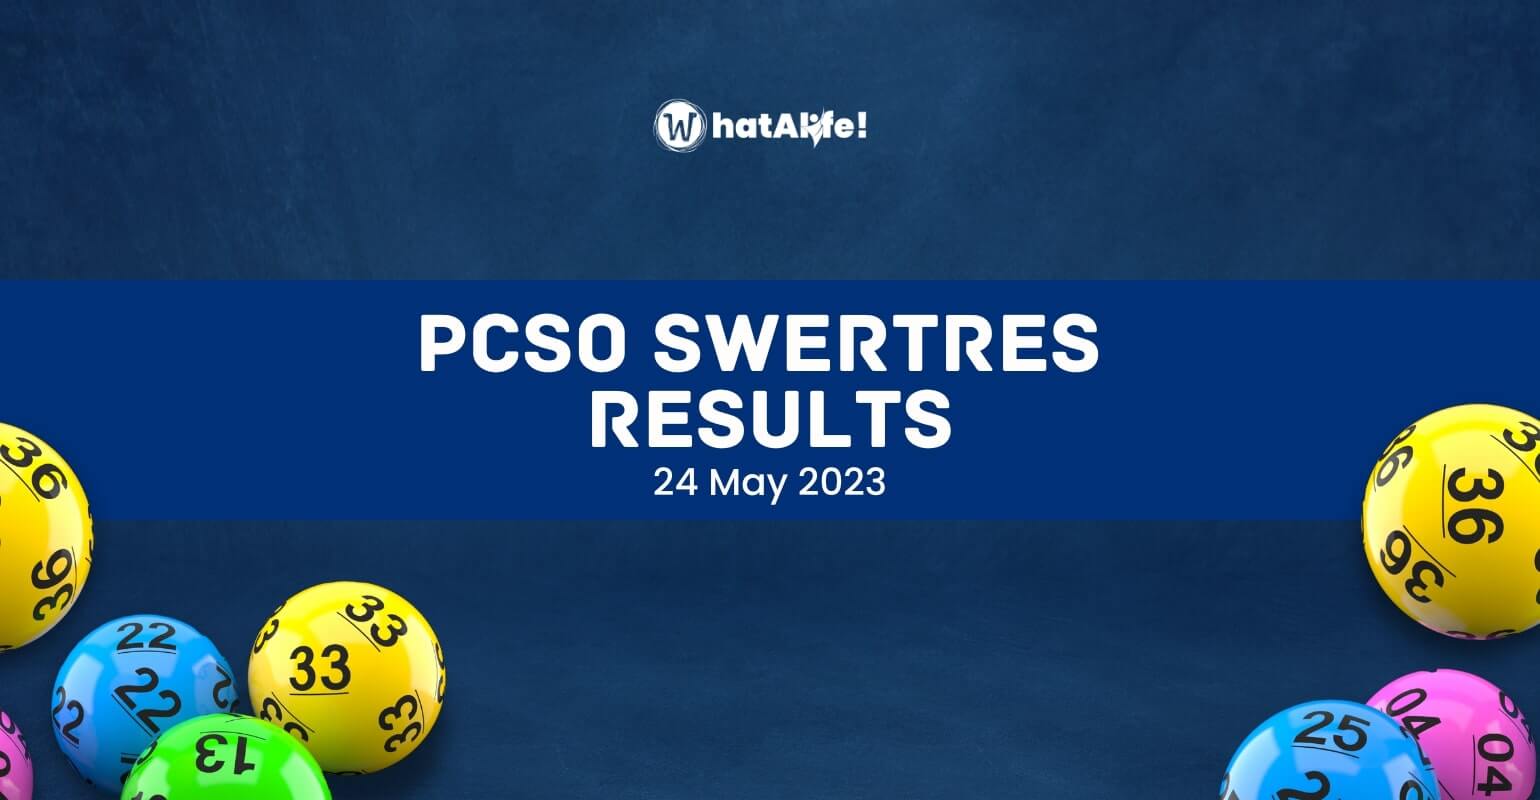 SWERTRES RESULTS May 24, 2023 (Wednesday)